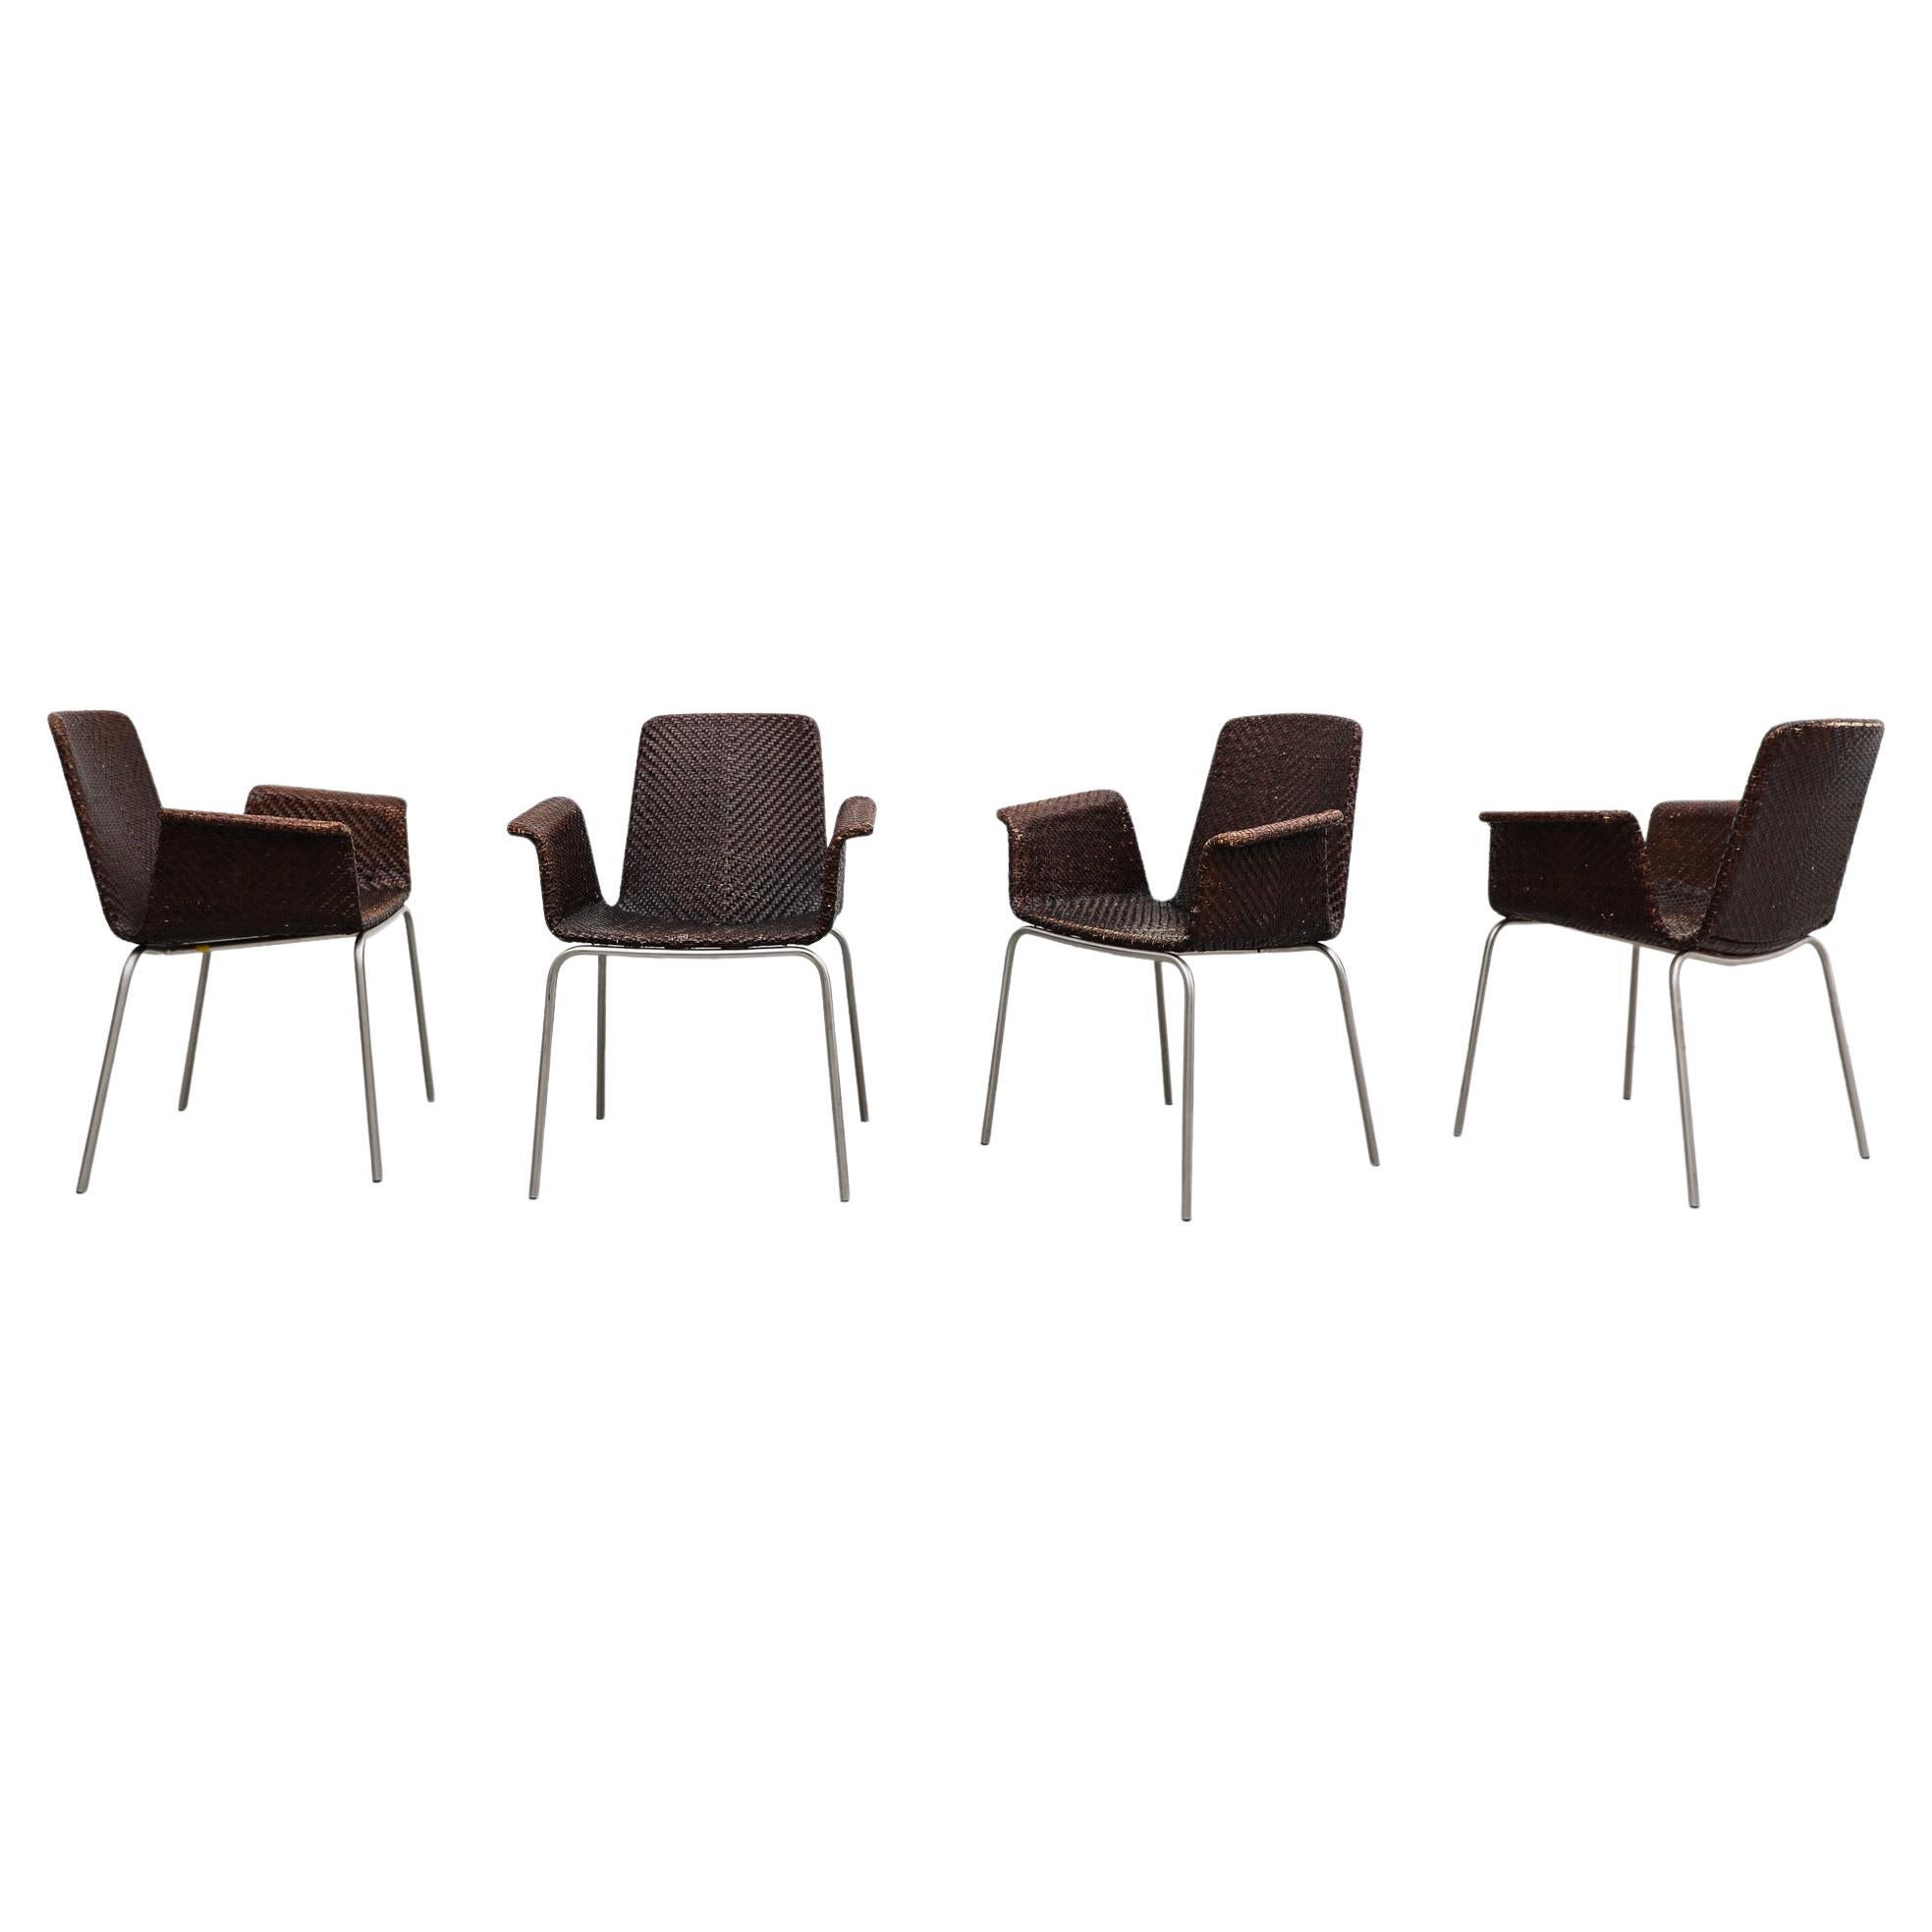 Set of 4 Preben Fabricius Inspired Dark Brown Woven Leather Dining Armchairs